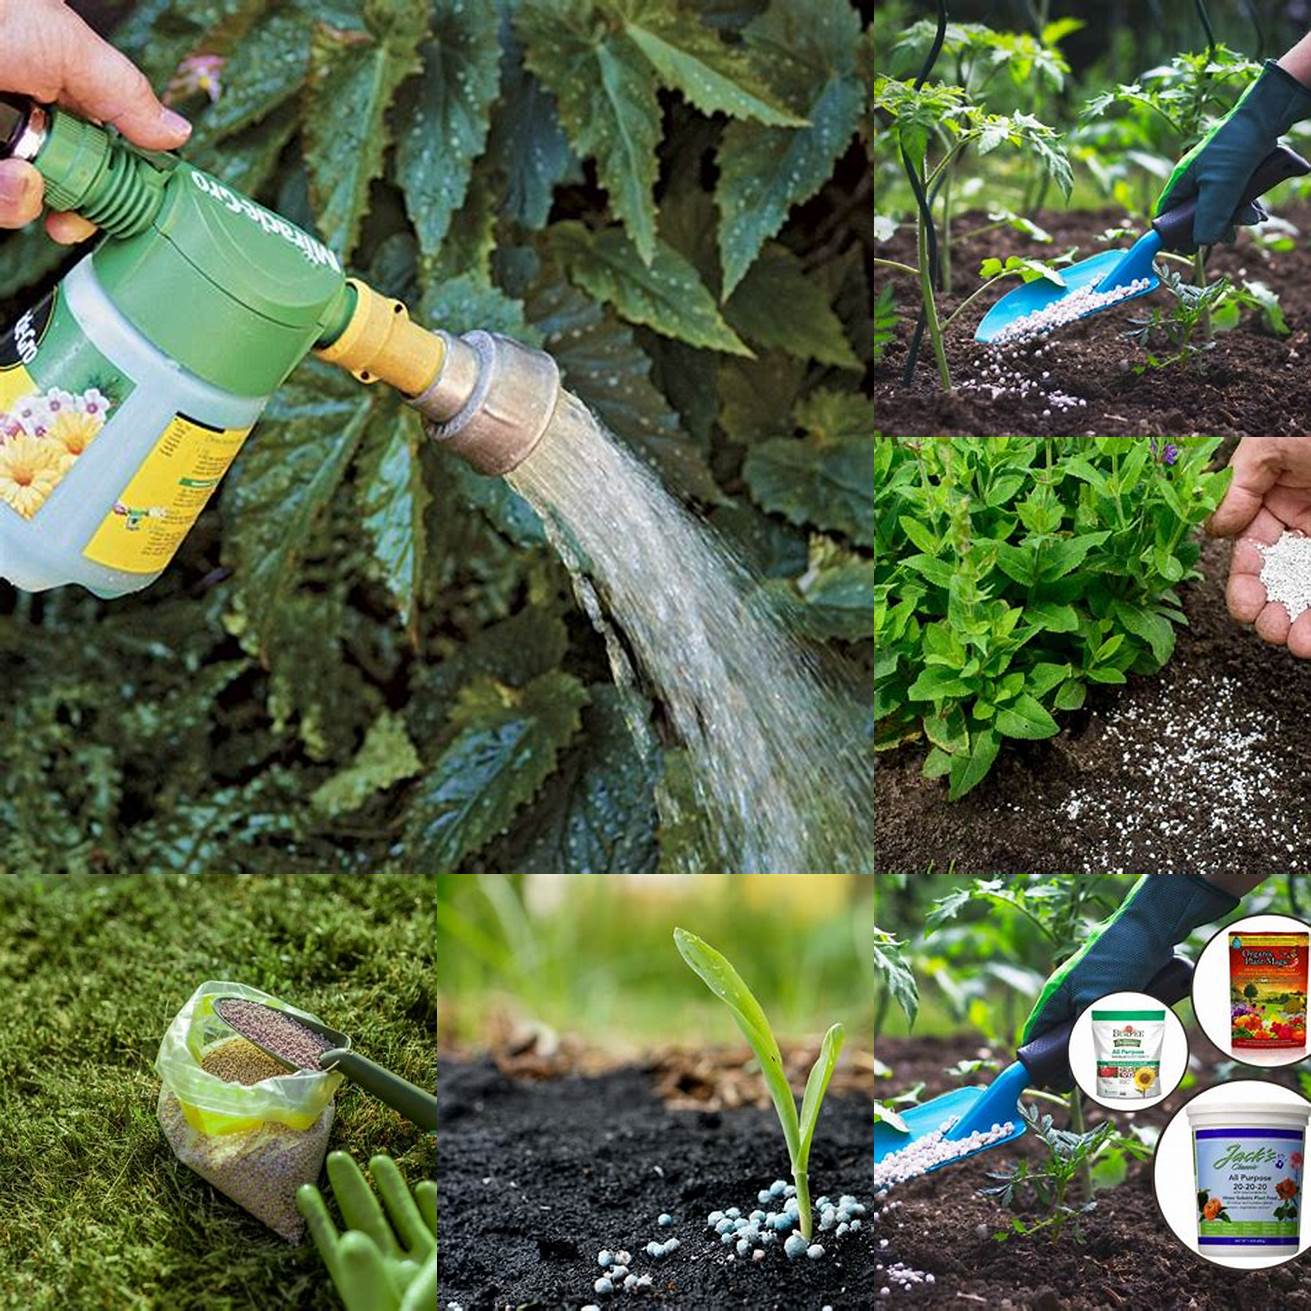 2 Fertilizing Use a fertilizer to help your plants grow strong and healthy